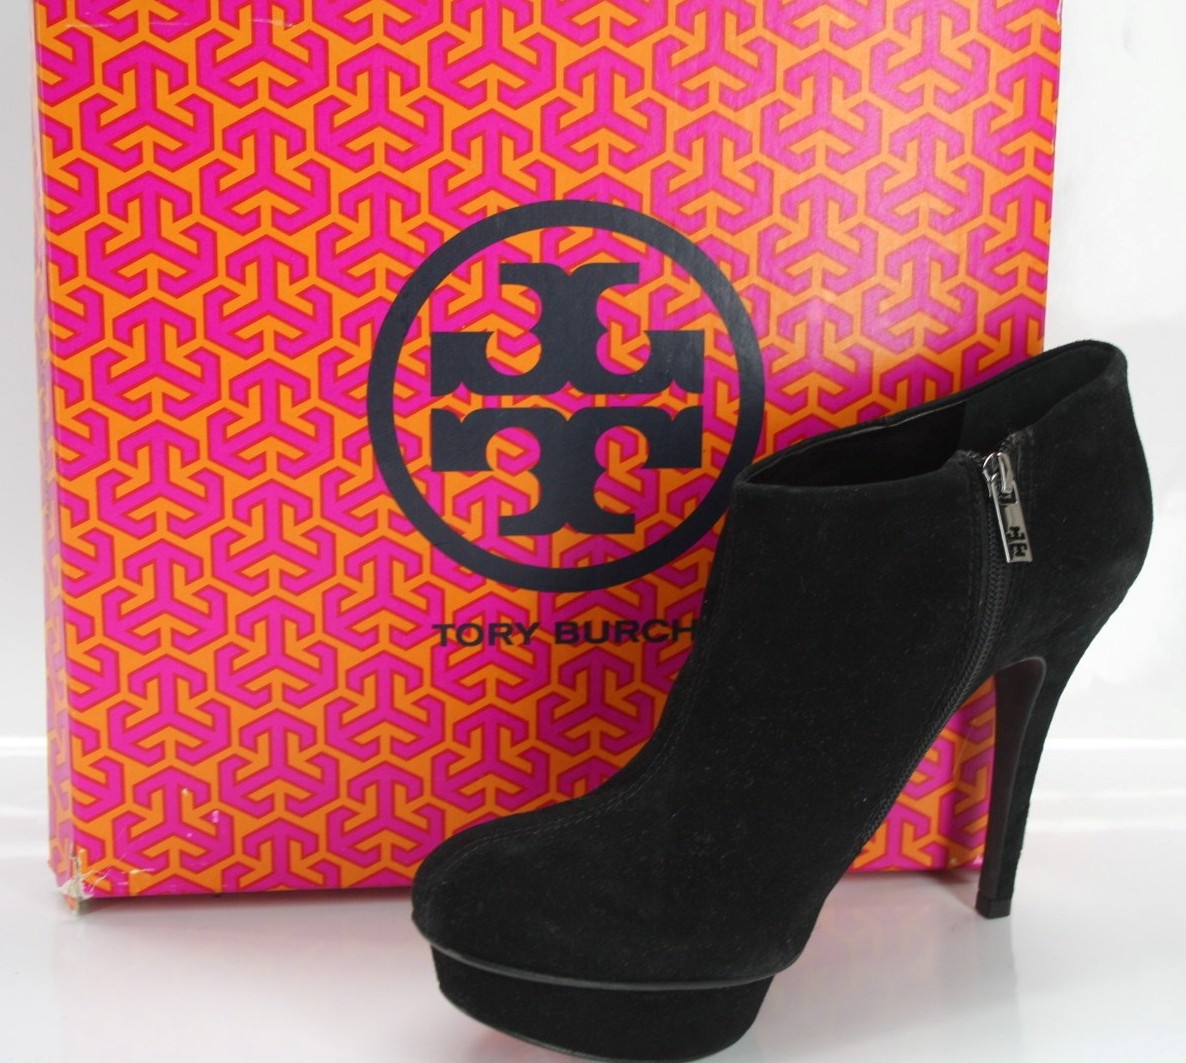 Tory Burch Cidnay Black Suede Platform Side Zip Ankle Boots SZ 10.5 New $495